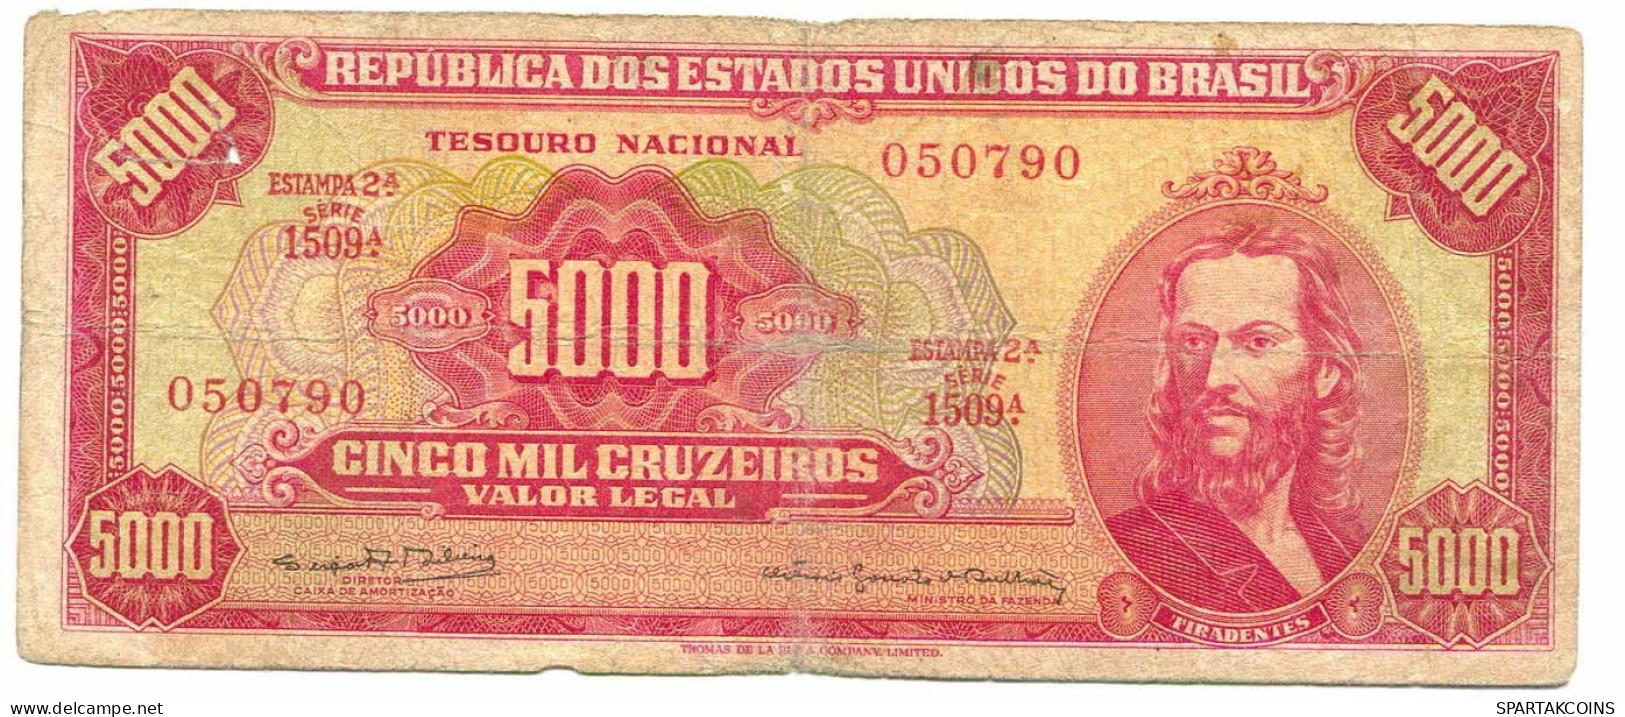 BRASIL 5000 CRUZEIROS 1964 SERIE 1509A Paper Money Banknote #P10876.4 - [11] Local Banknote Issues